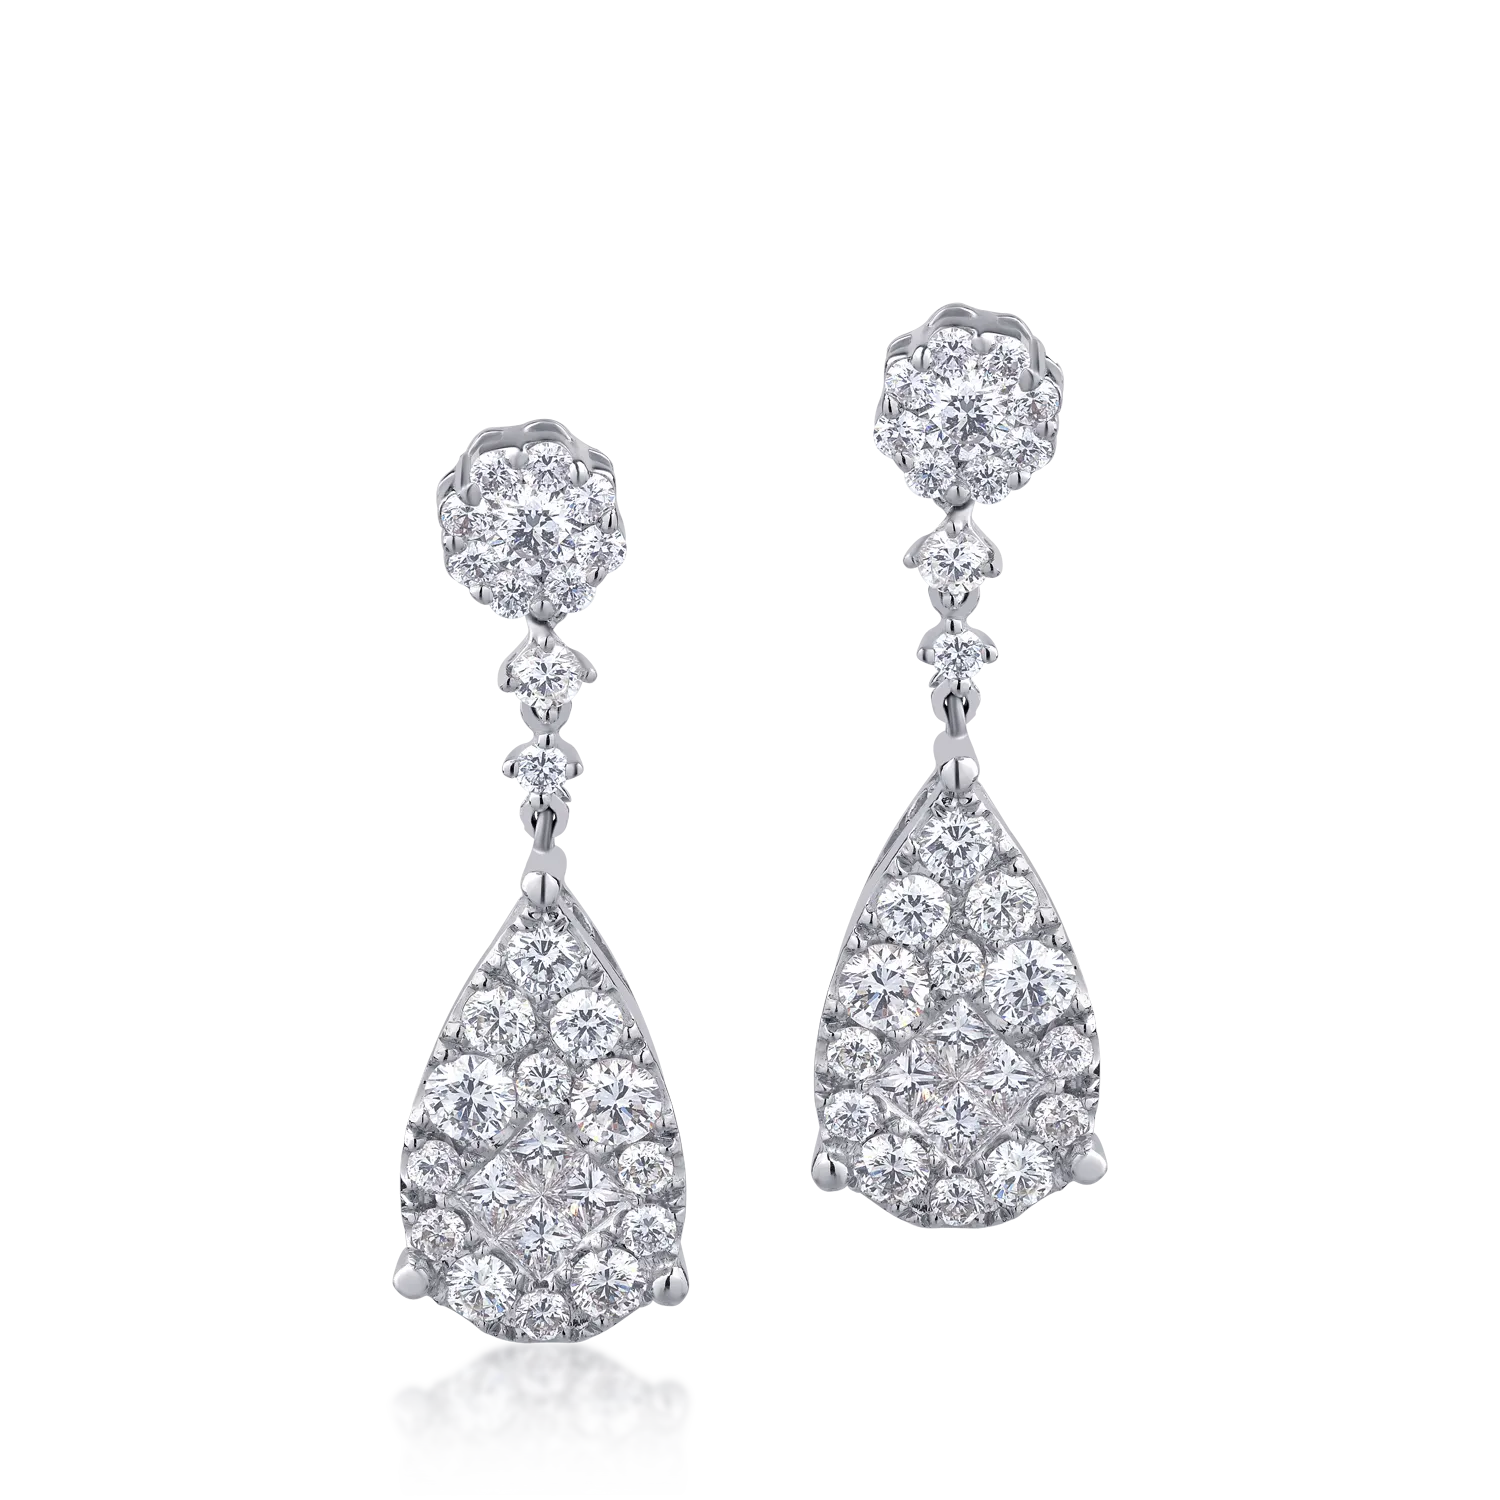 18K white gold earrings with 2.04ct diamonds